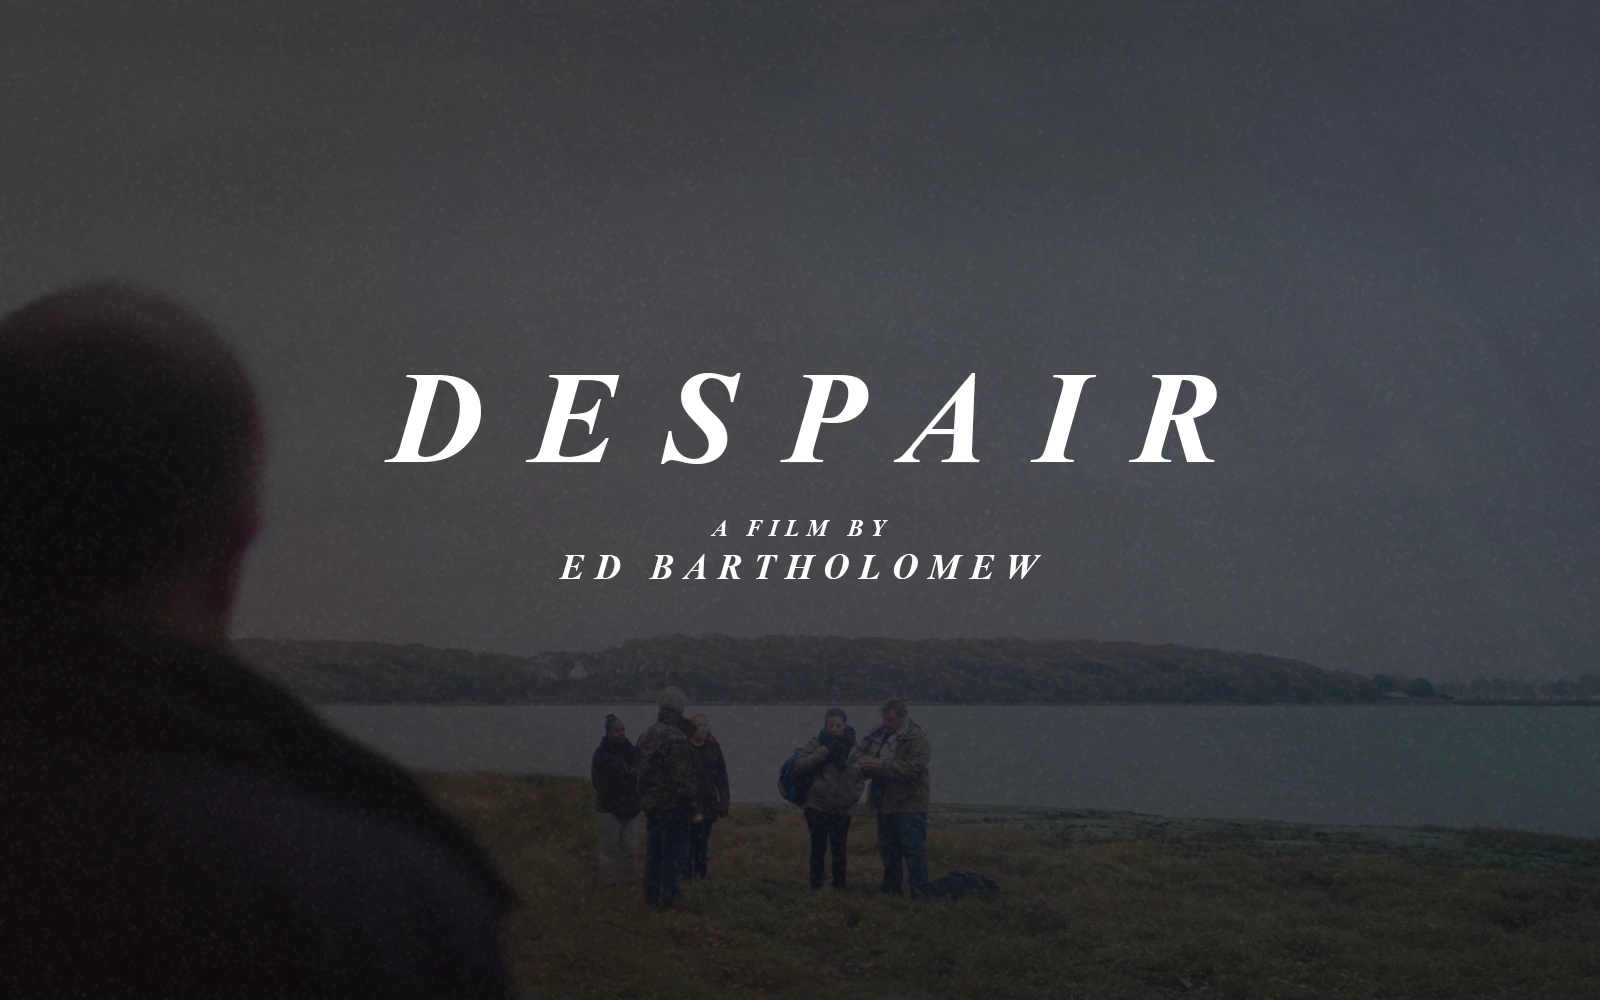 The back of a man is seen looking forward to the beach with immigrants arriving on a gloomy autumn day, introducing ‘Despair’ a short film by Ed Bartholomew